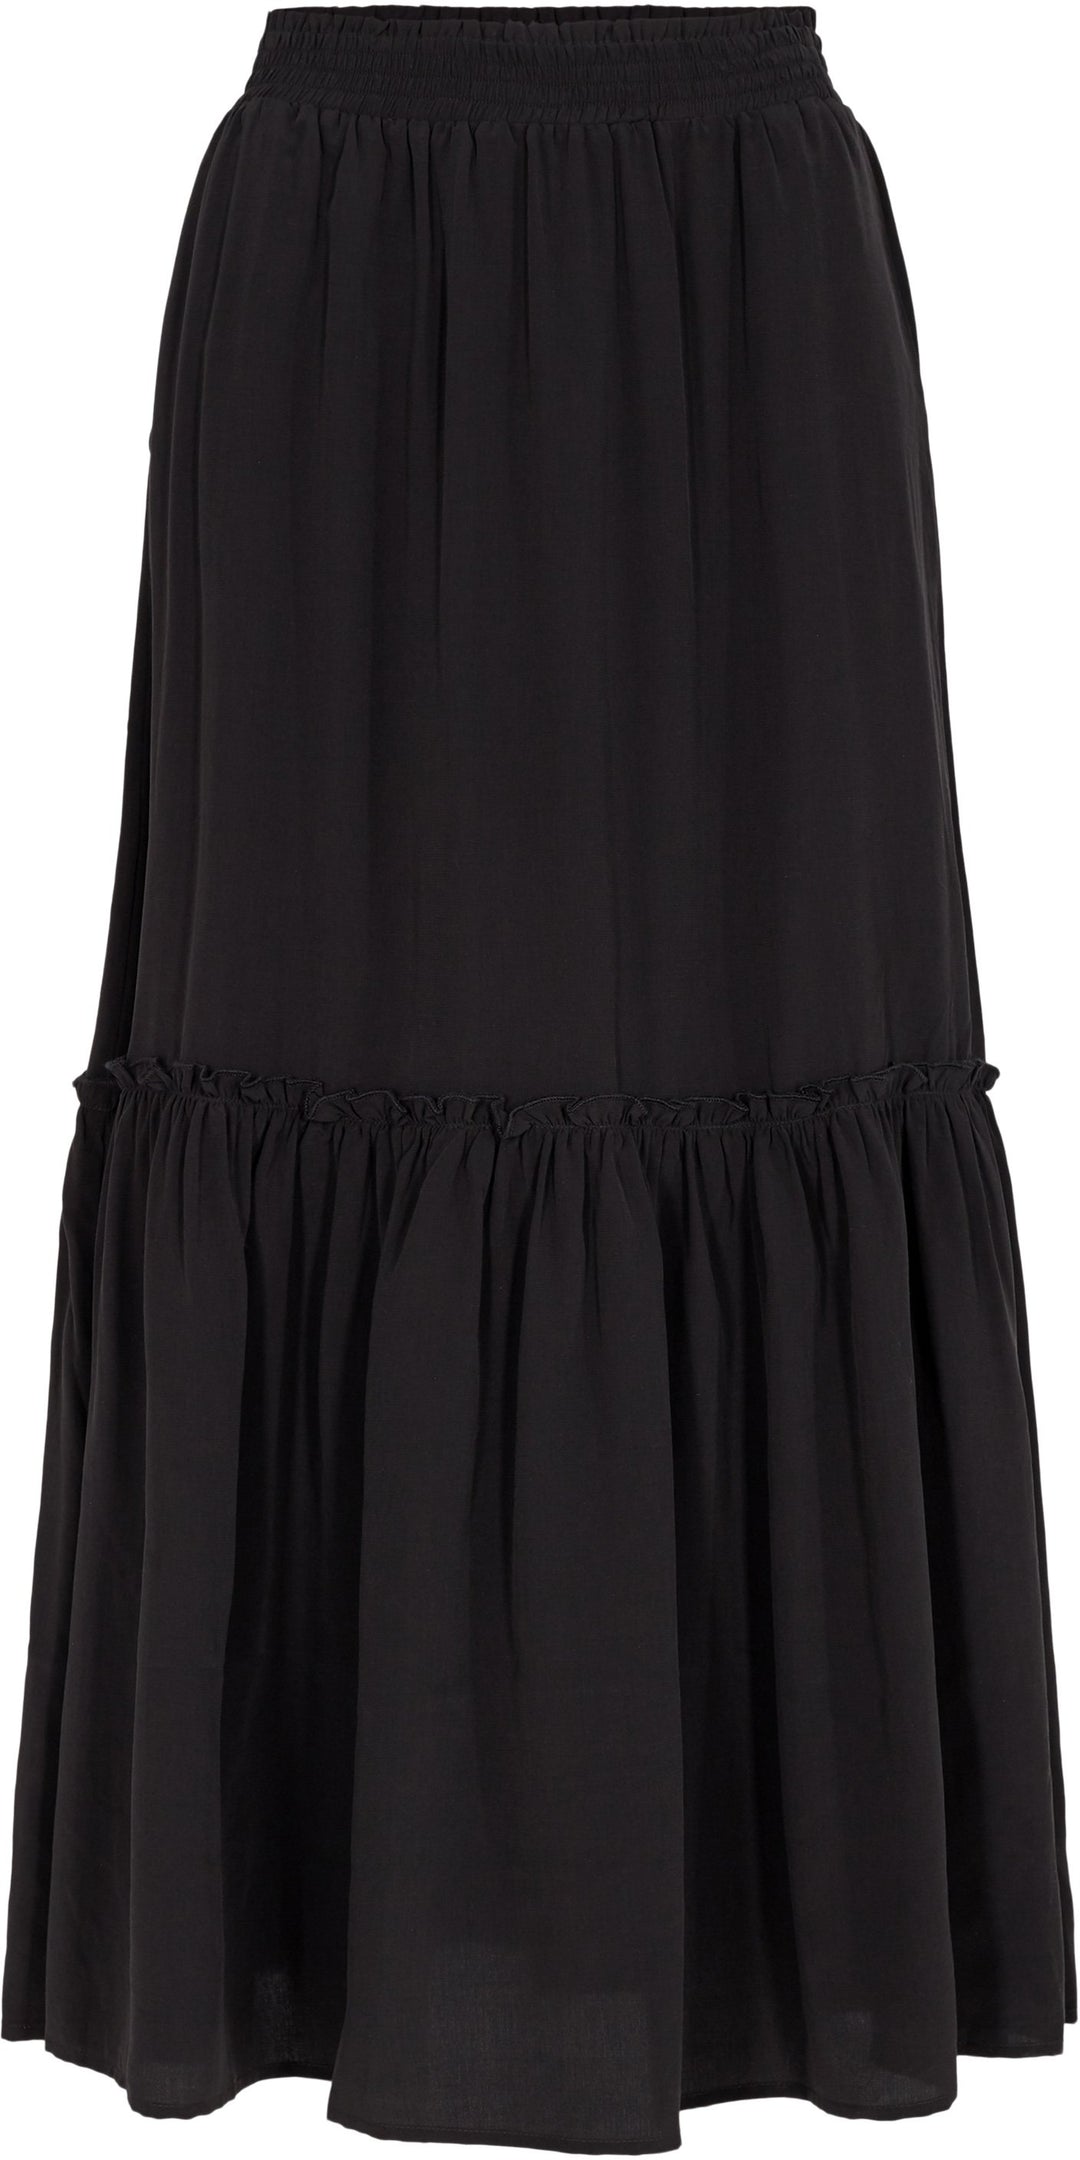 Cocouture - New Gipsy Skirt - Black Nederdele 